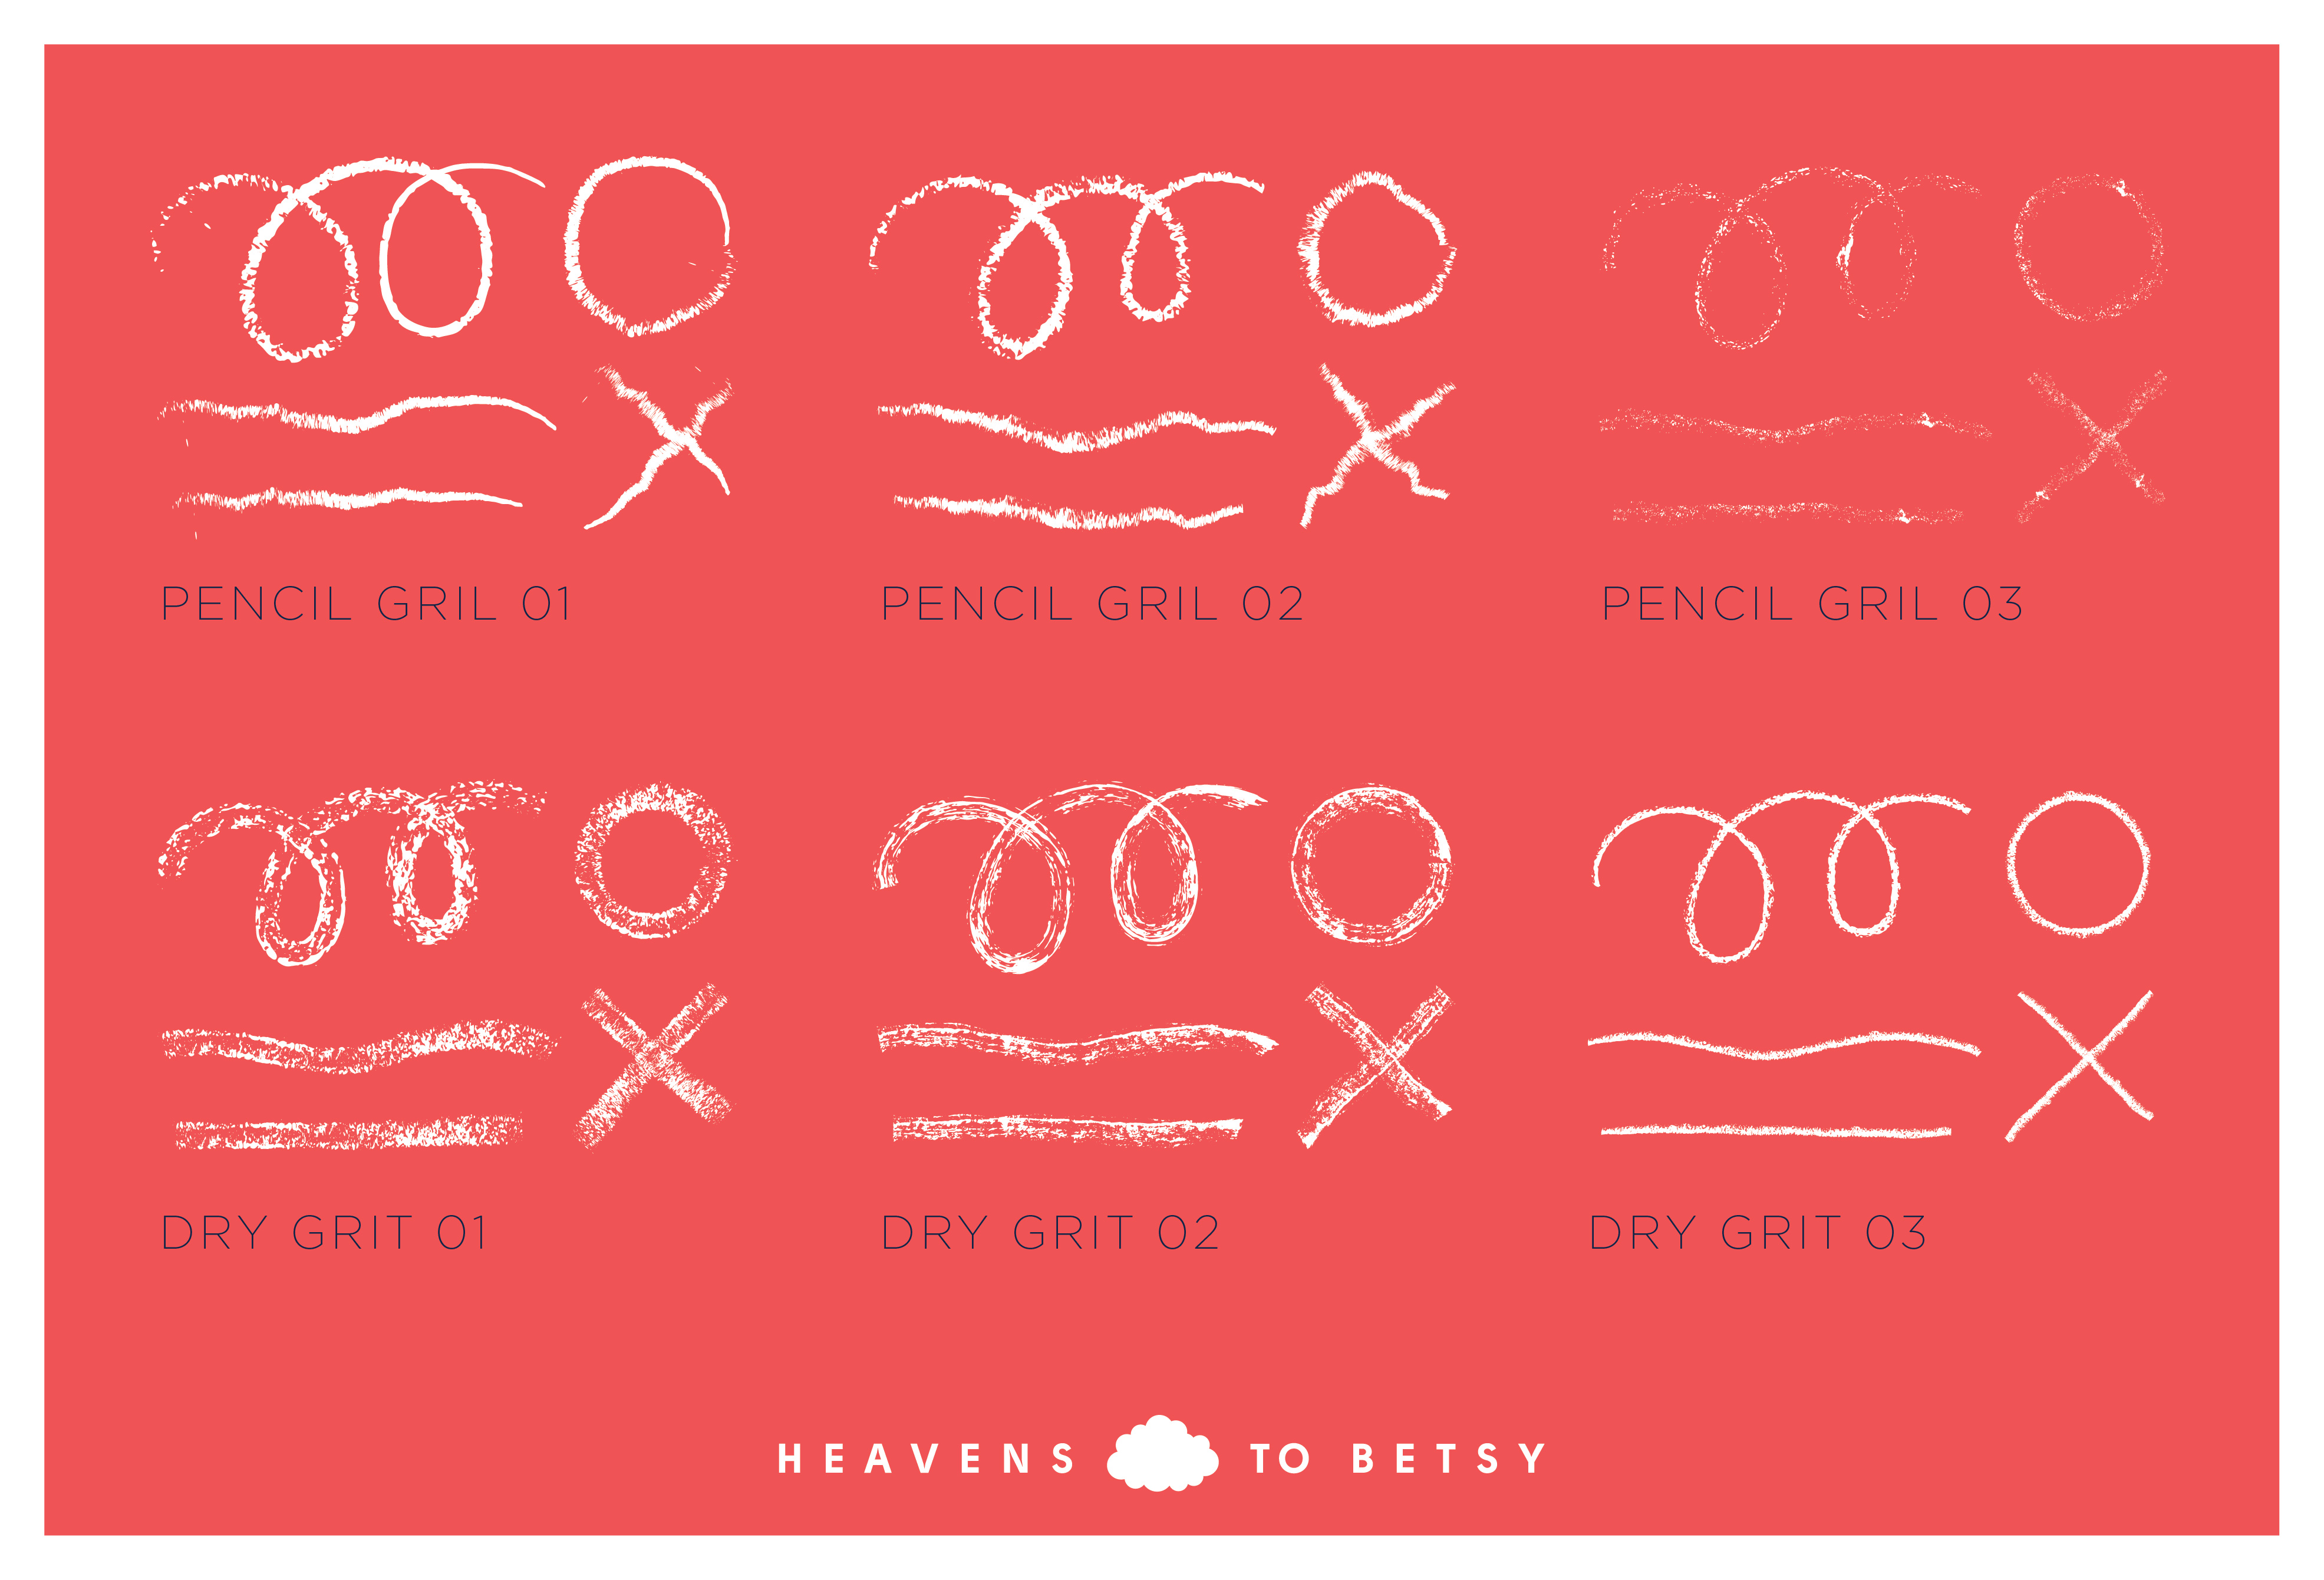 Hand crafted, gritty, speckled, grungy texture vector brushes for Adobe Illustrator.